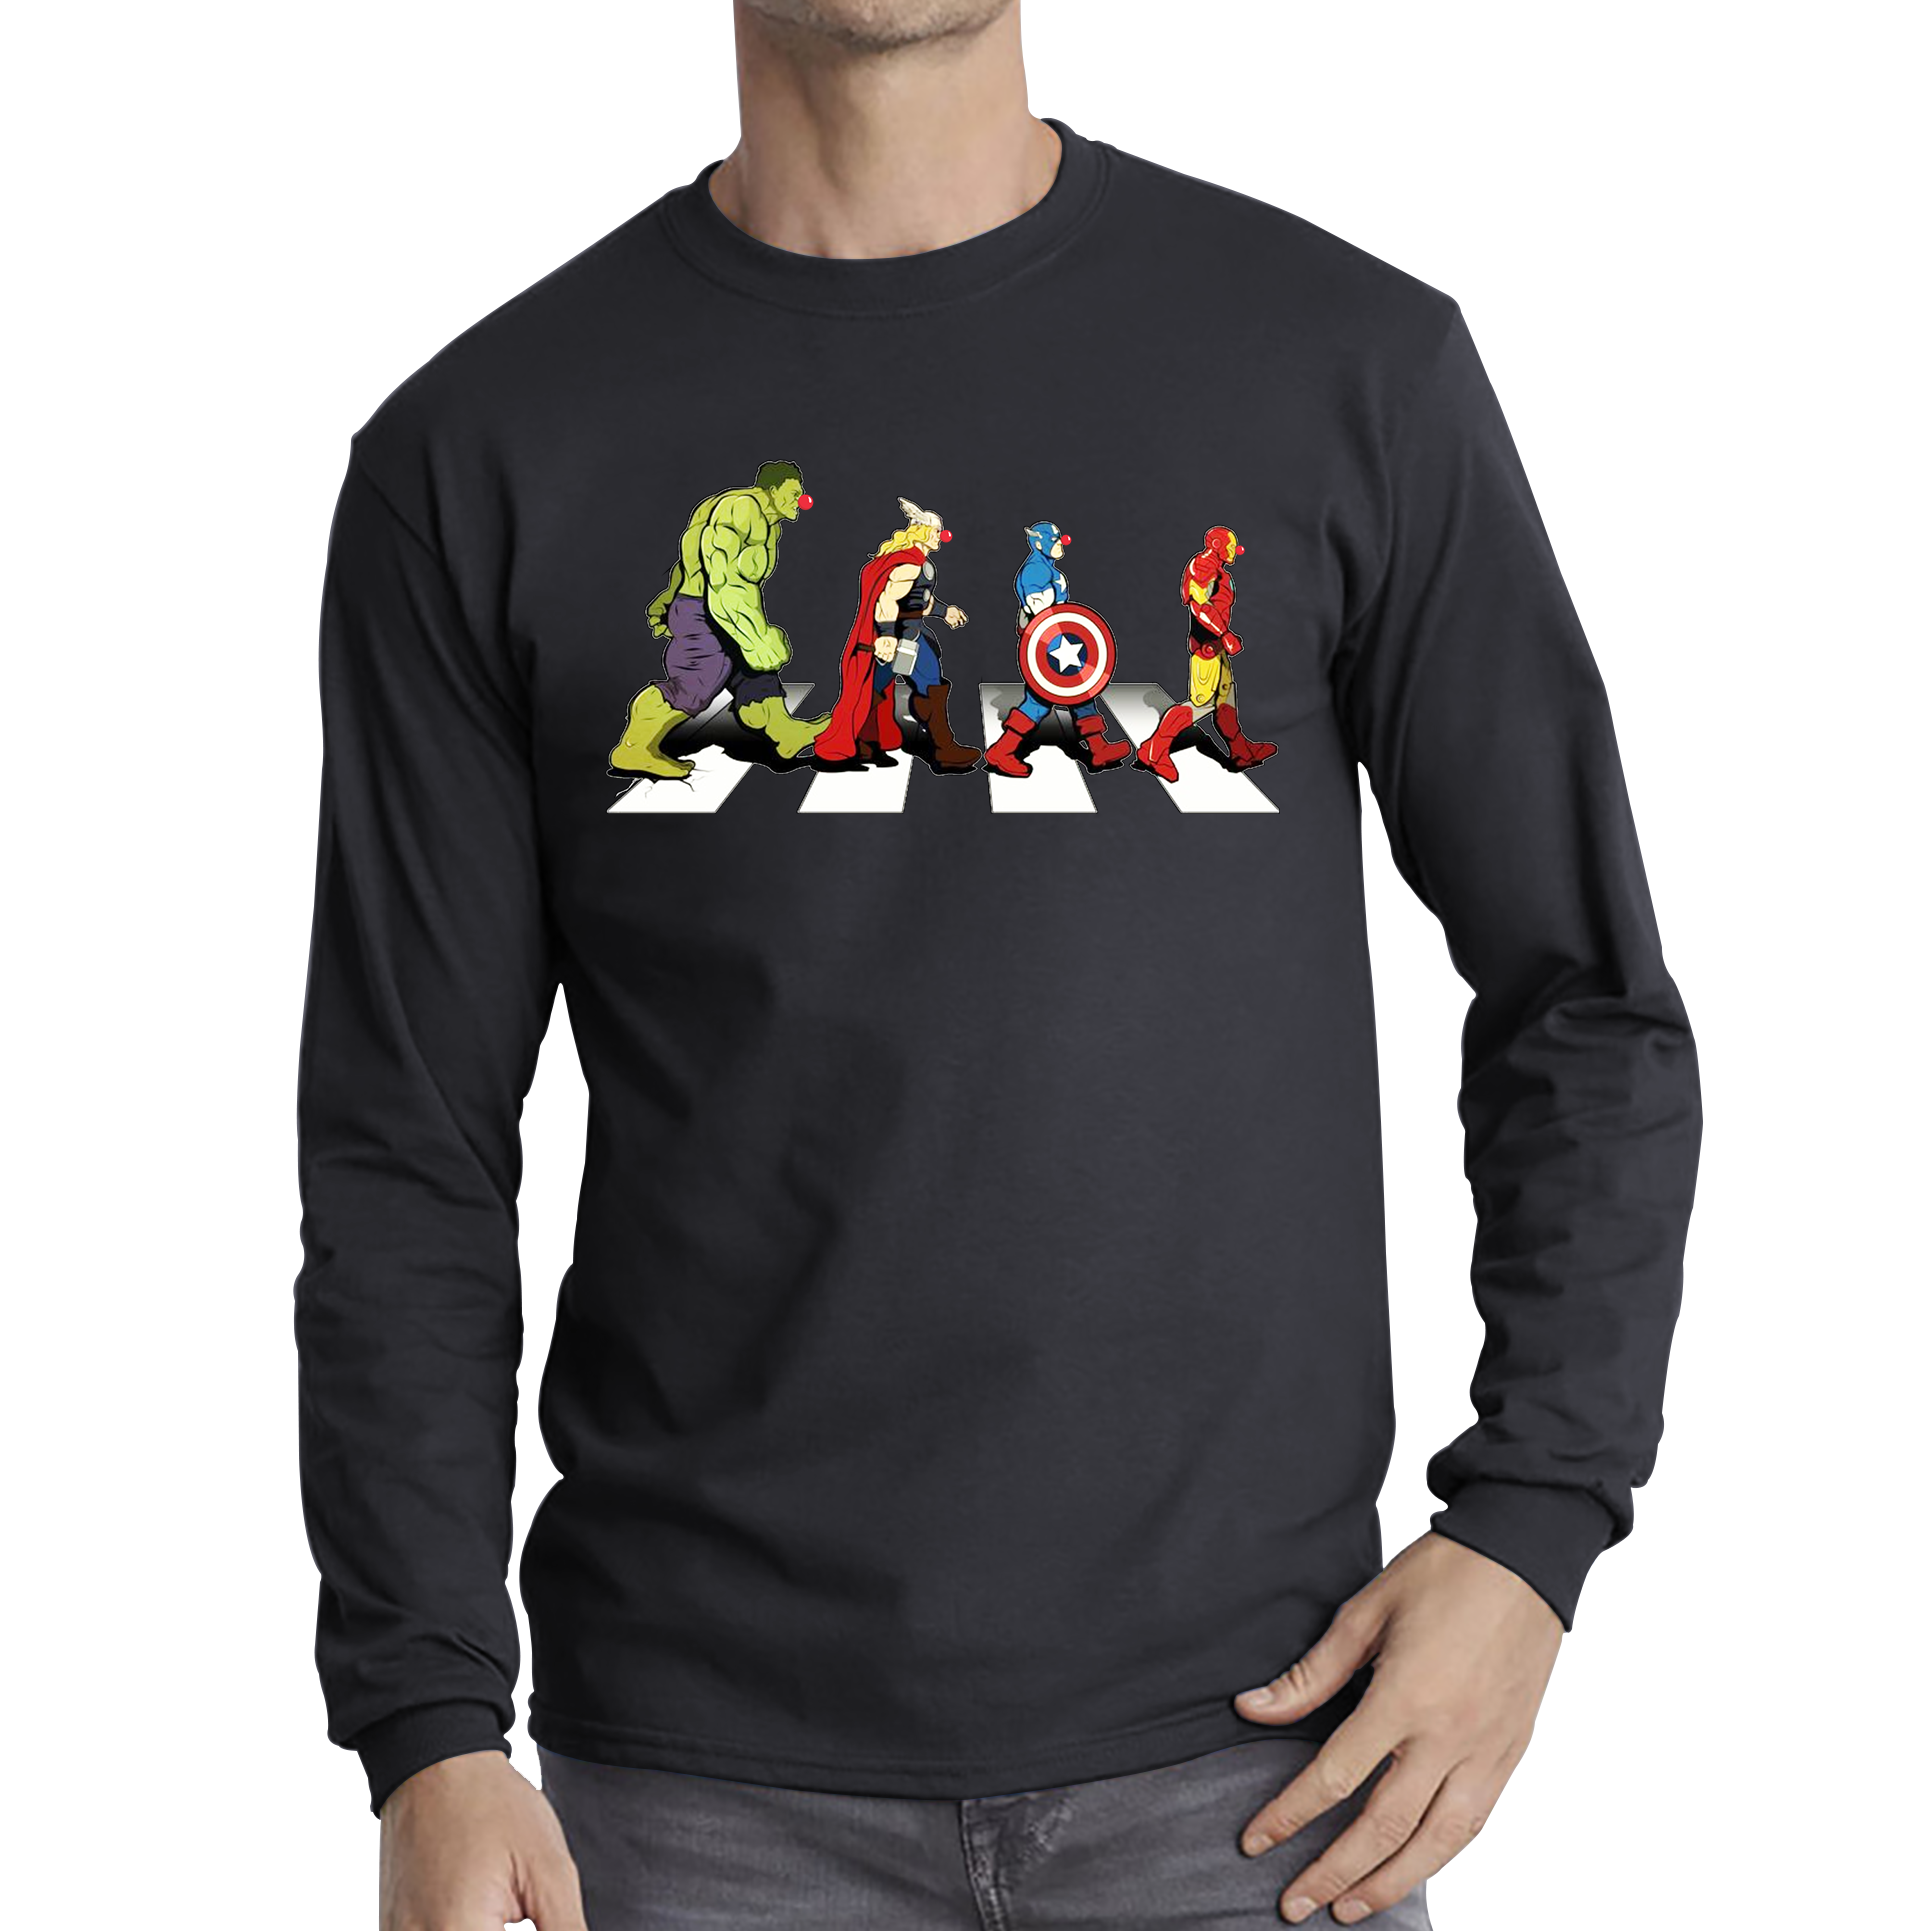 Hulk Thor Captain America Iron Man Marvel Avengers Abbey Road Red Nose Day Adult Long Sleeve T Shirt. 50% Goes To Charity